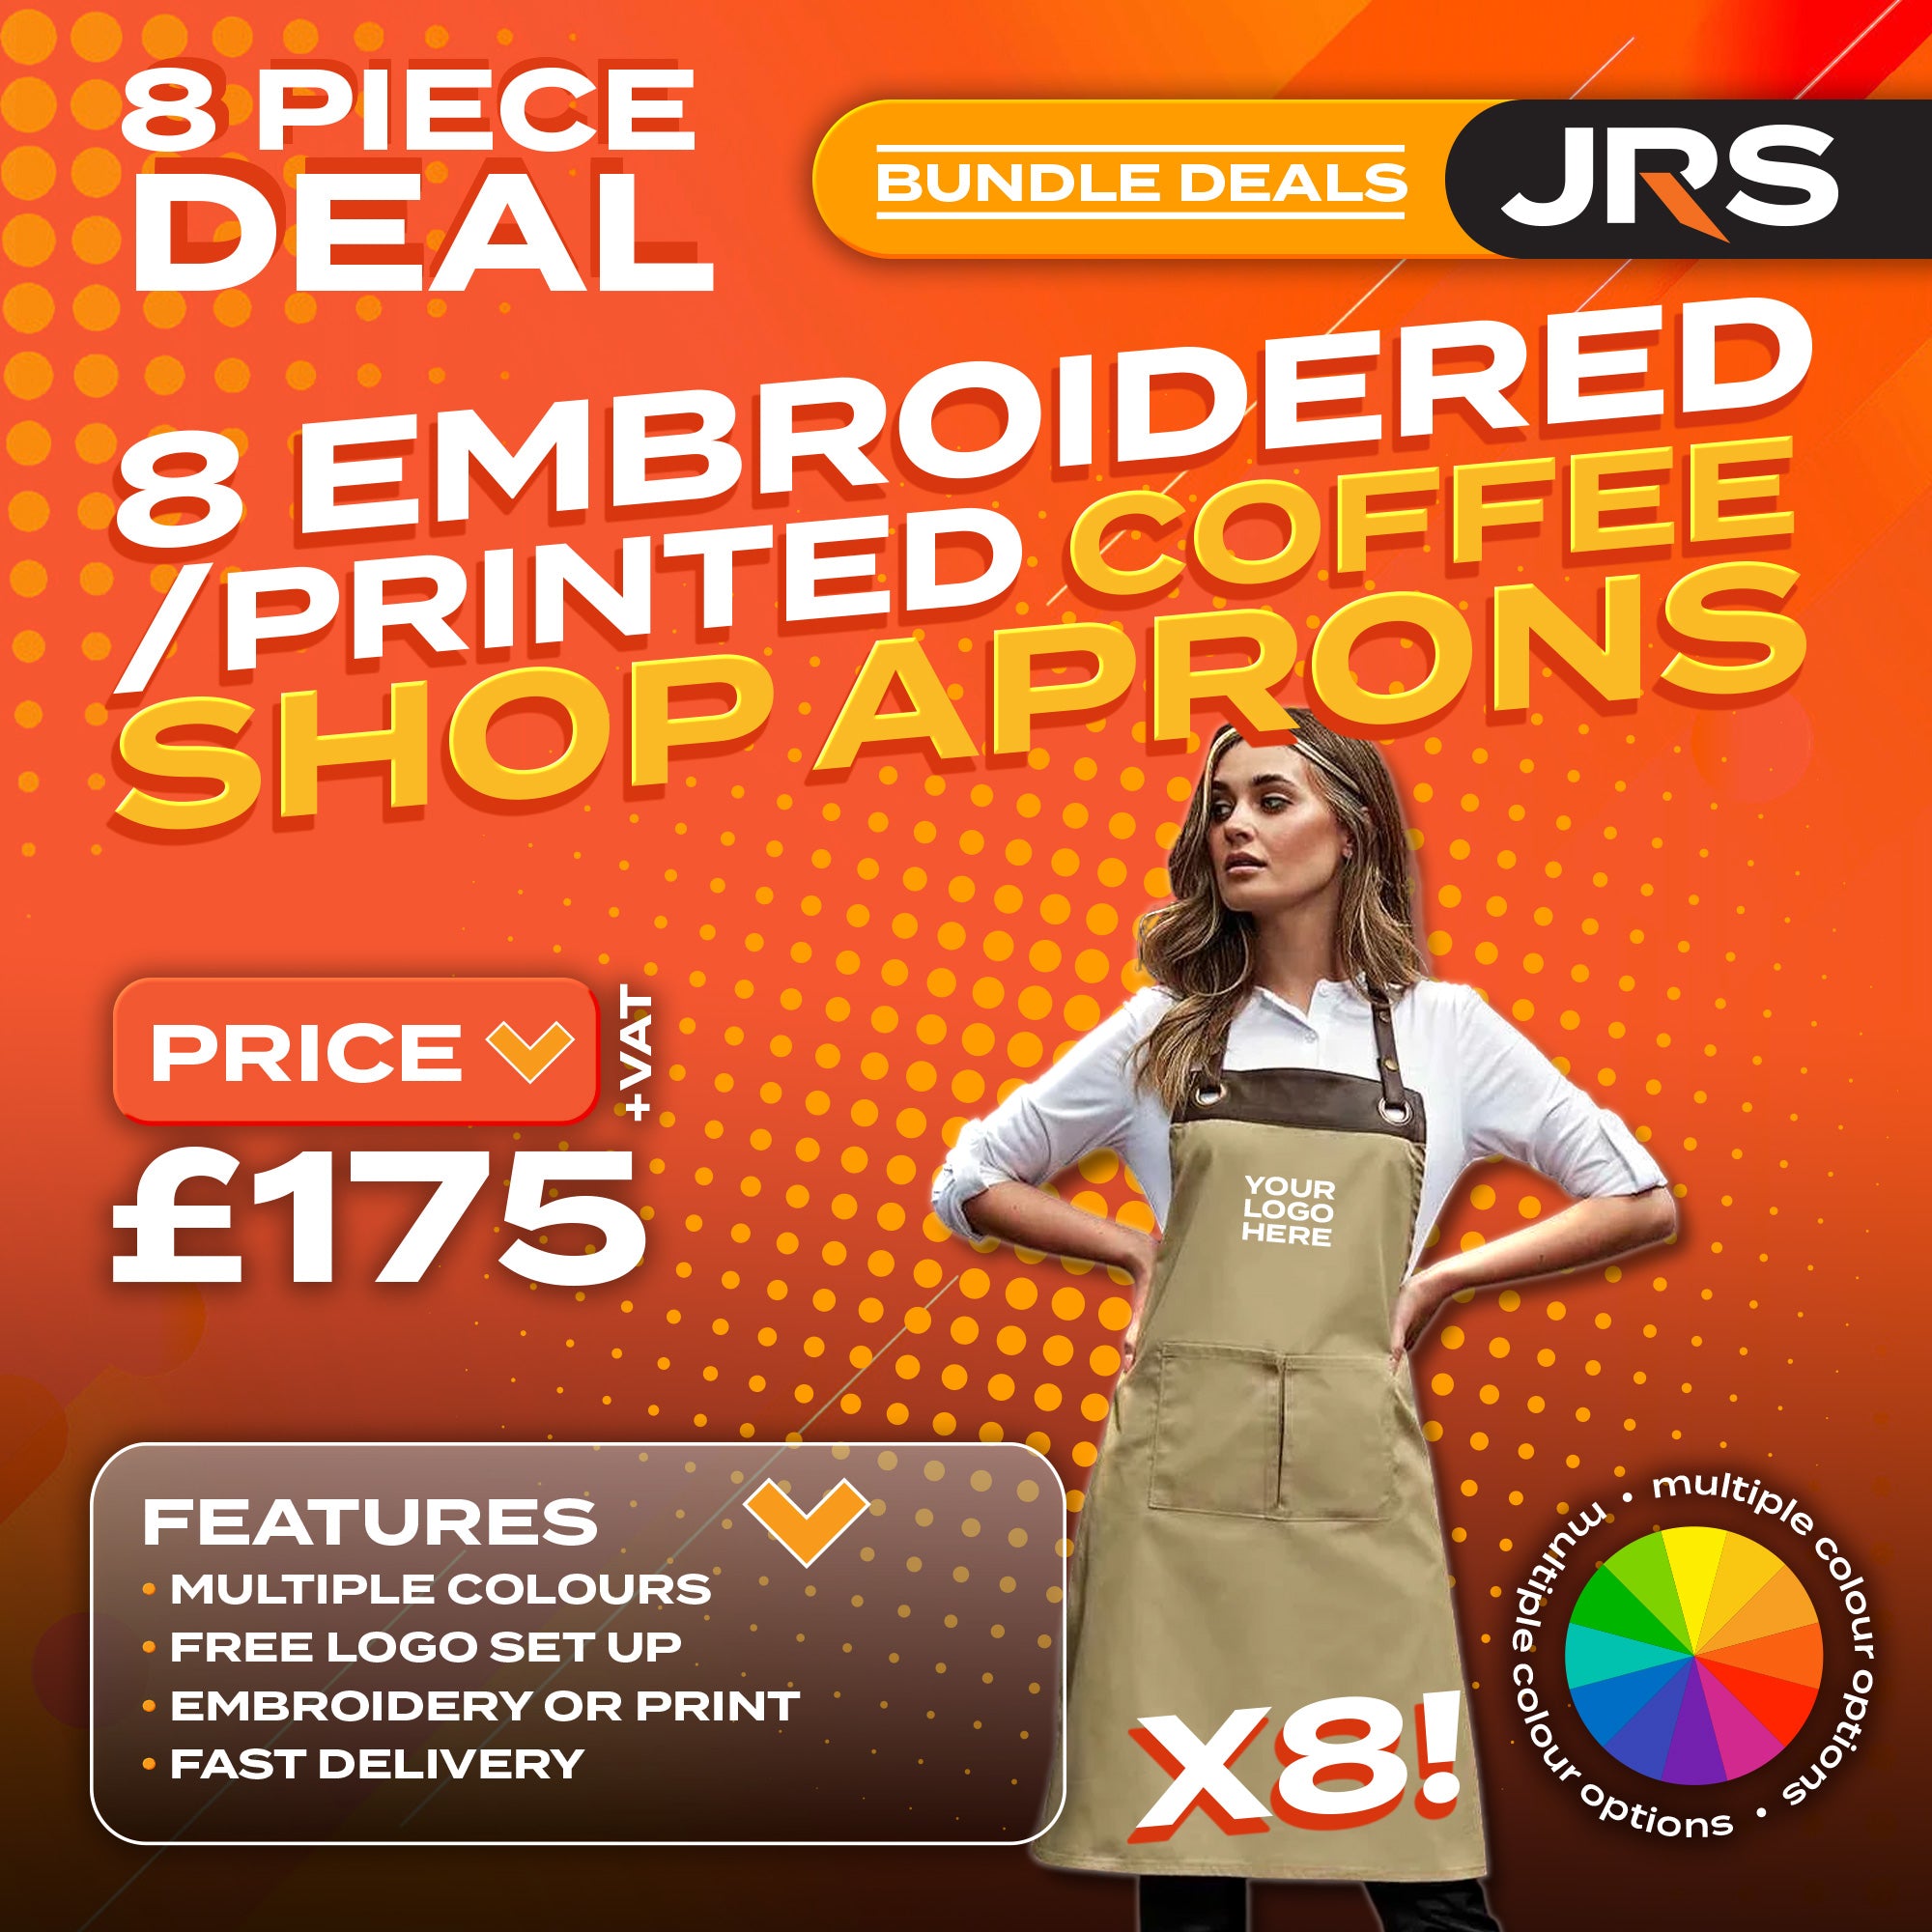 8x Embroidered/Printed Coffee Aprons Bundle Deal